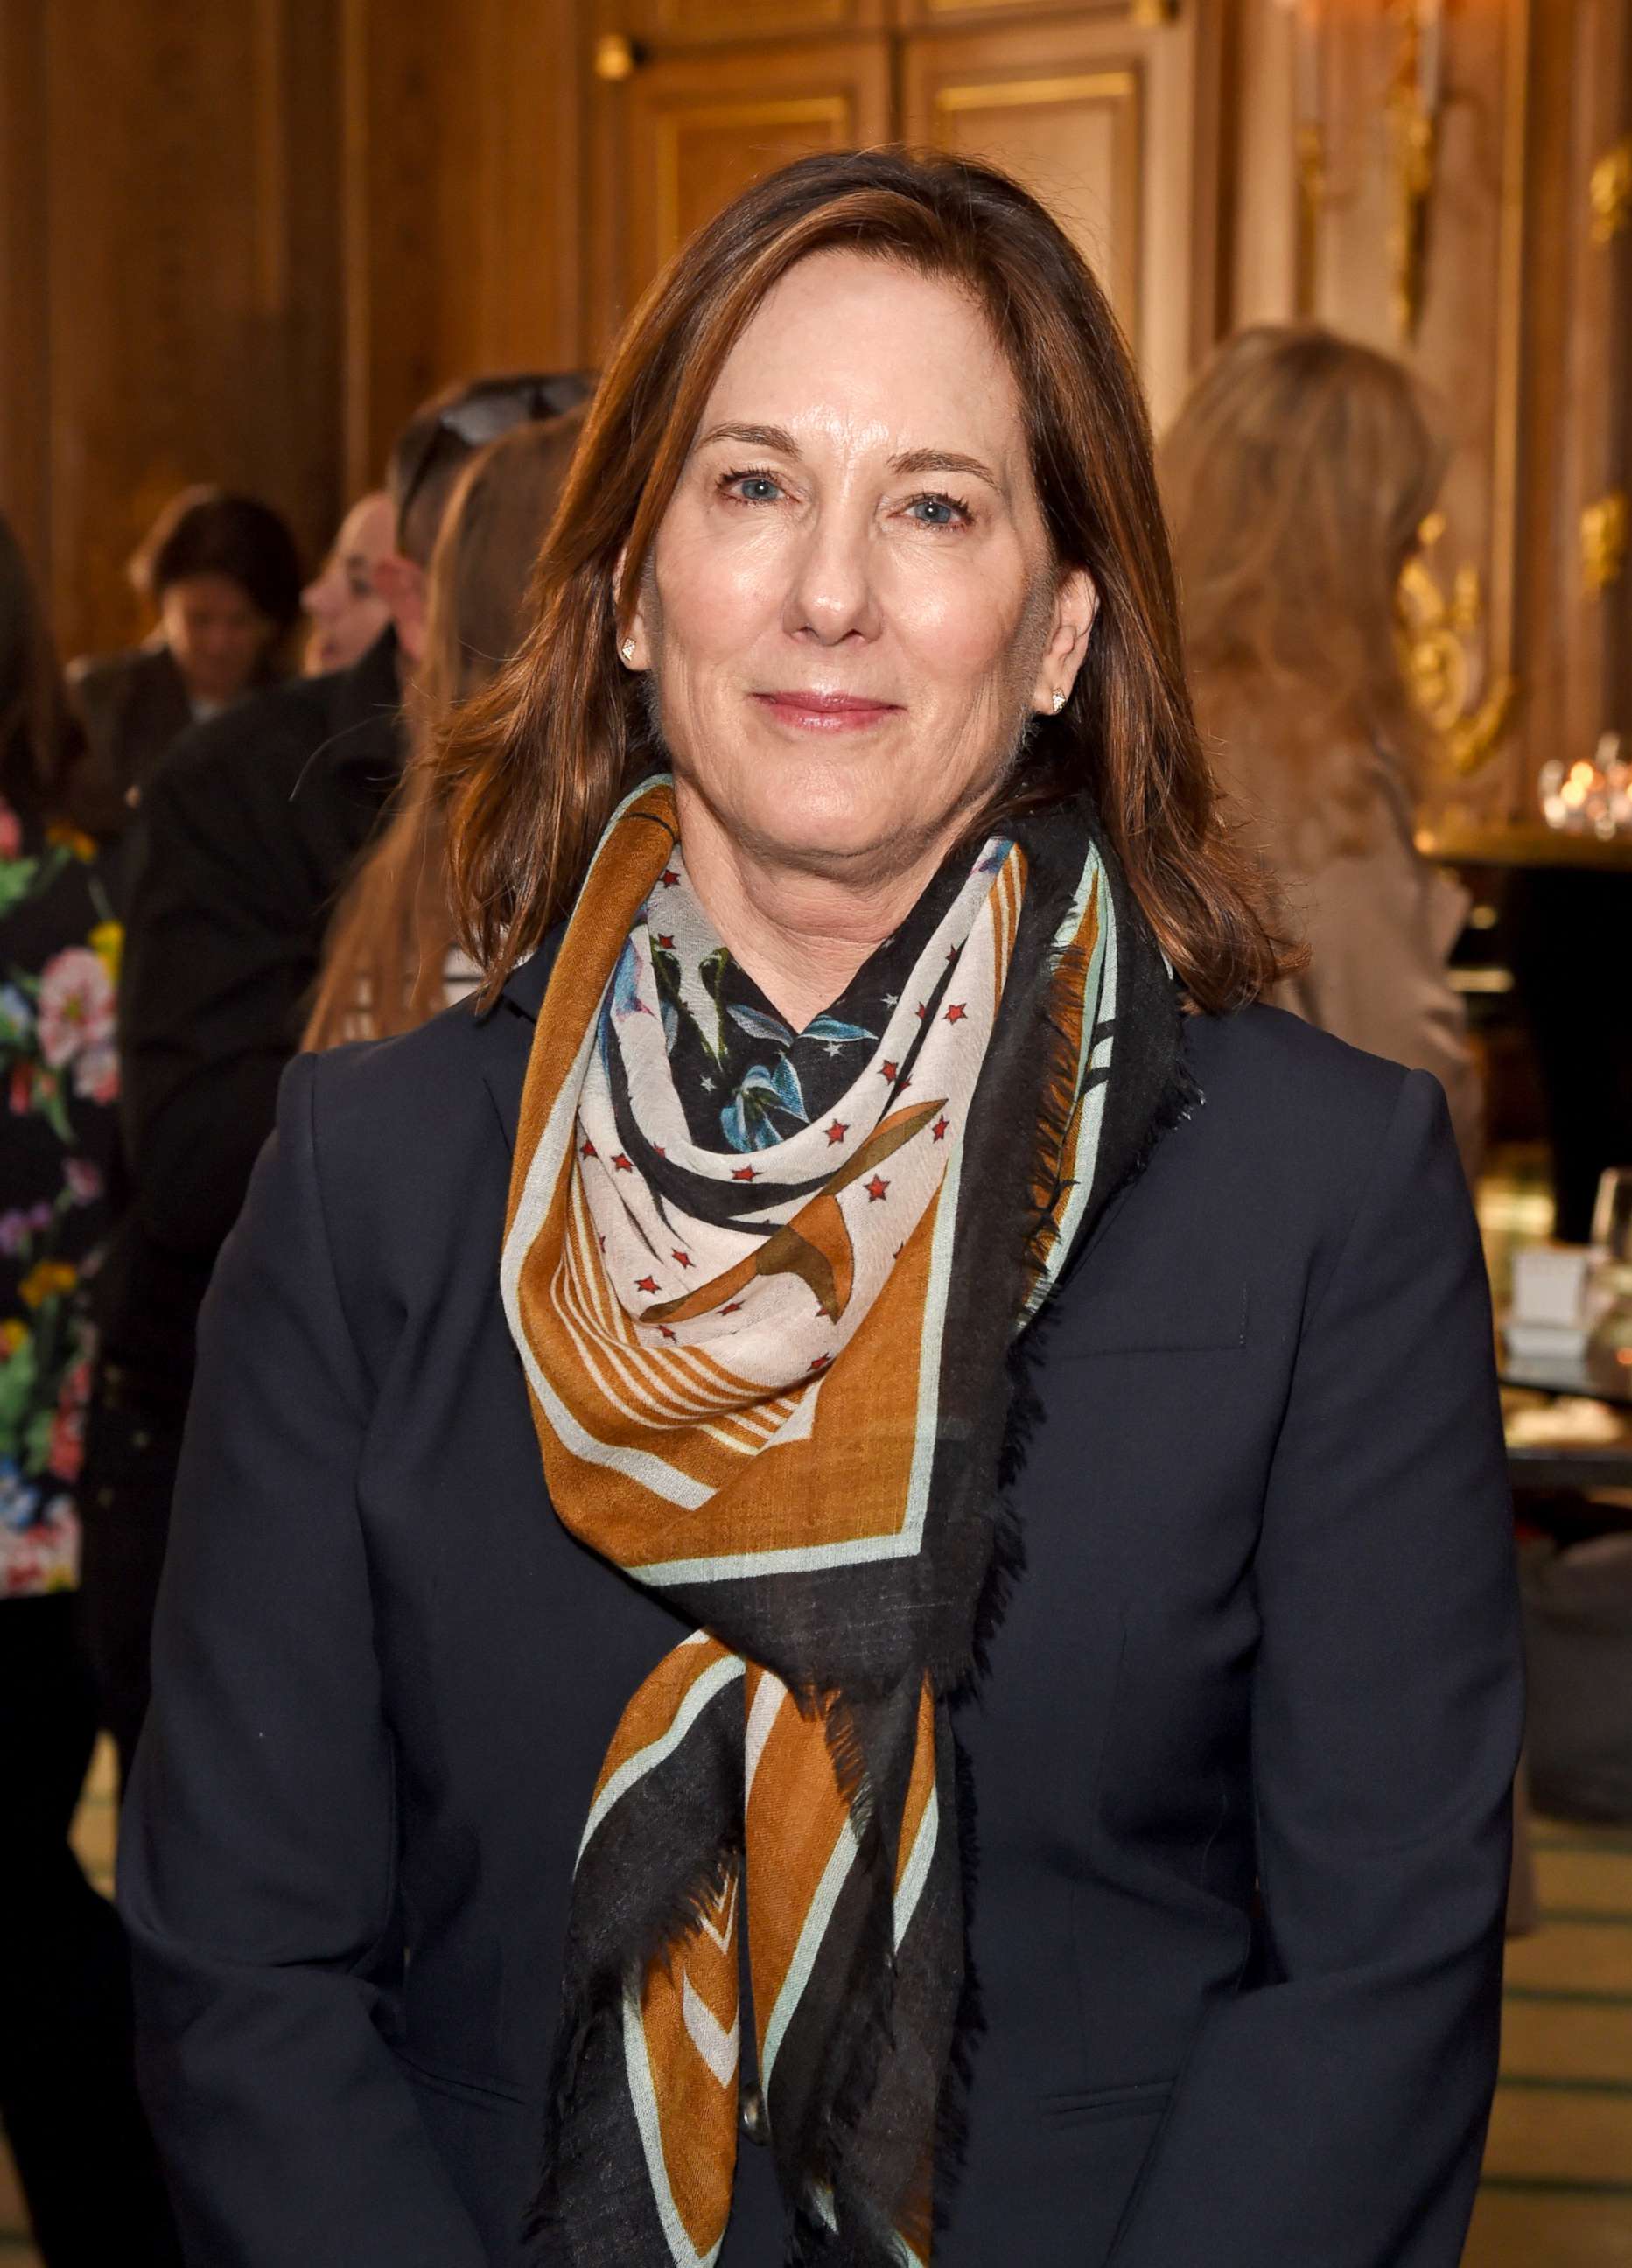 PHOTO: Kathleen Kennedy attends the Academy of Motion Picture Arts and Sciences Women In Film lunch at Claridge's Hotel, Oct. 6, 2017, in London.